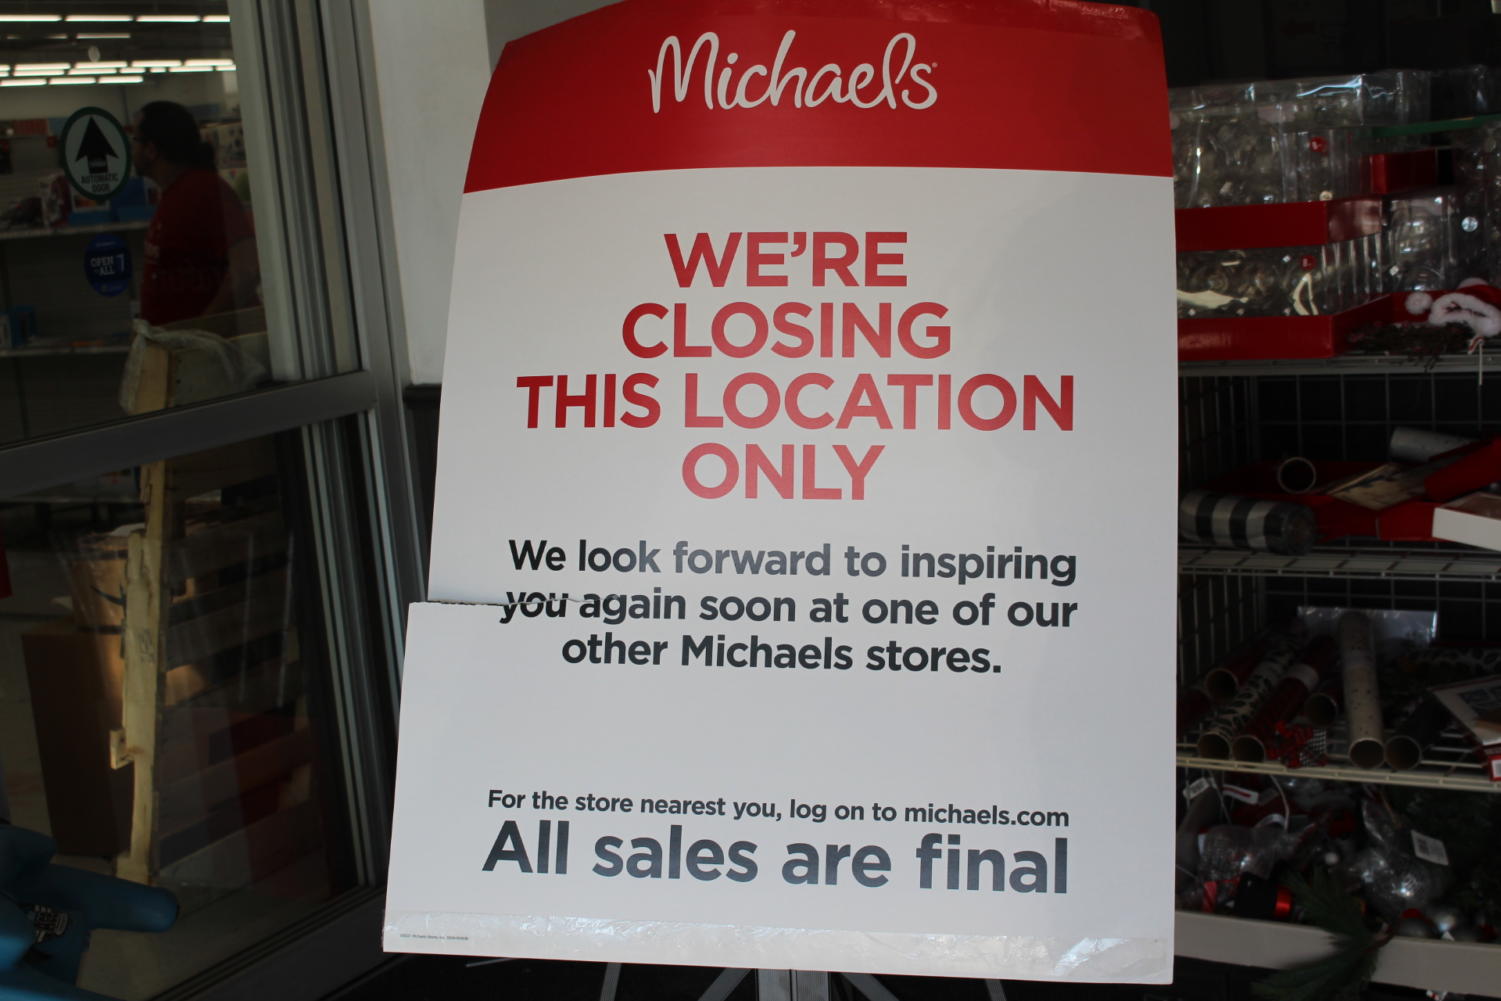 Michaels Store Closes its Doors, Leaving Many at an Inconvenience